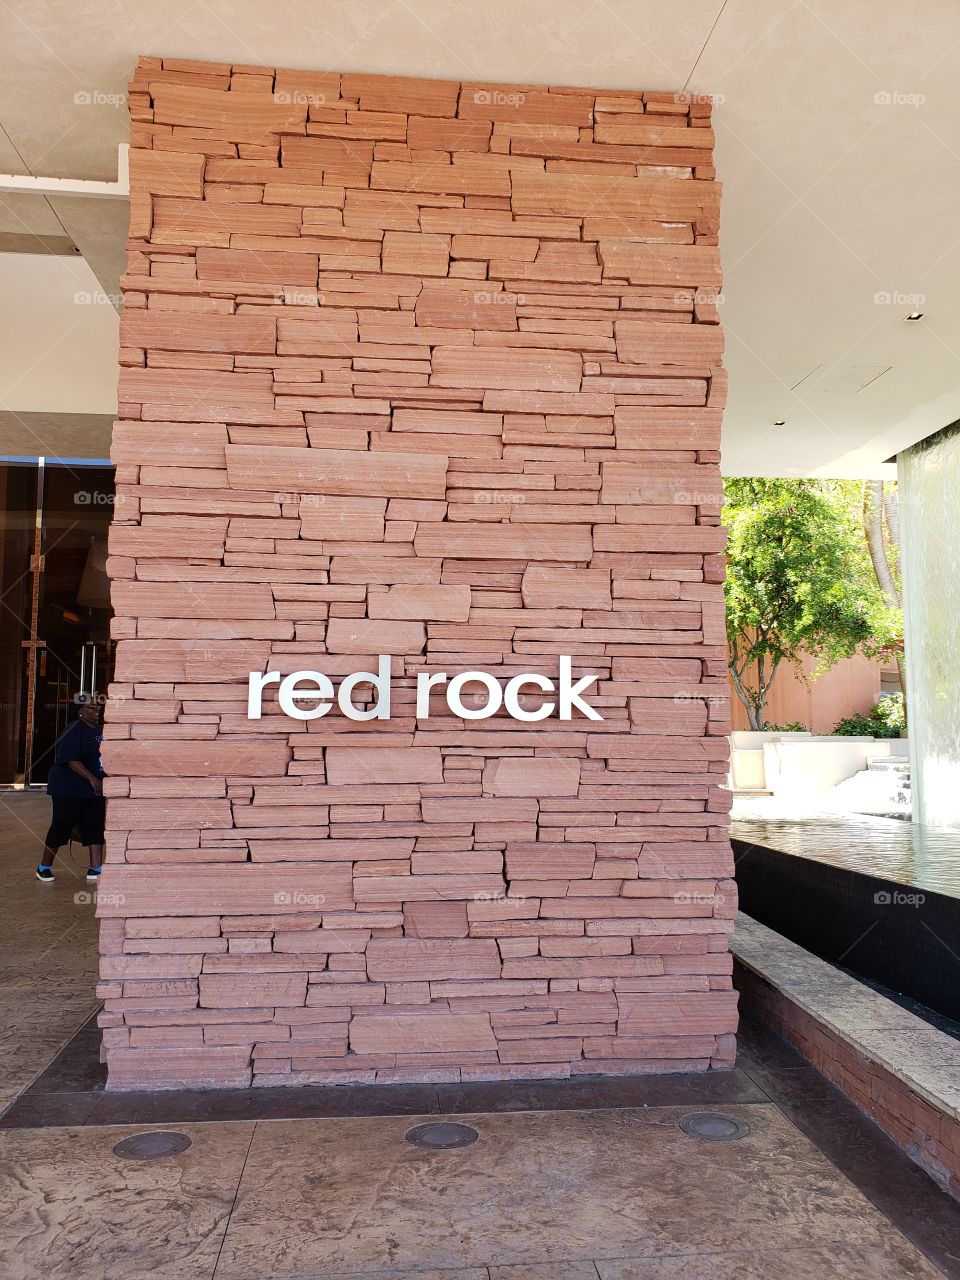 Signs at one of the entrances at Red Rock Casino and Resort in Las Vegas, Nevada, USA